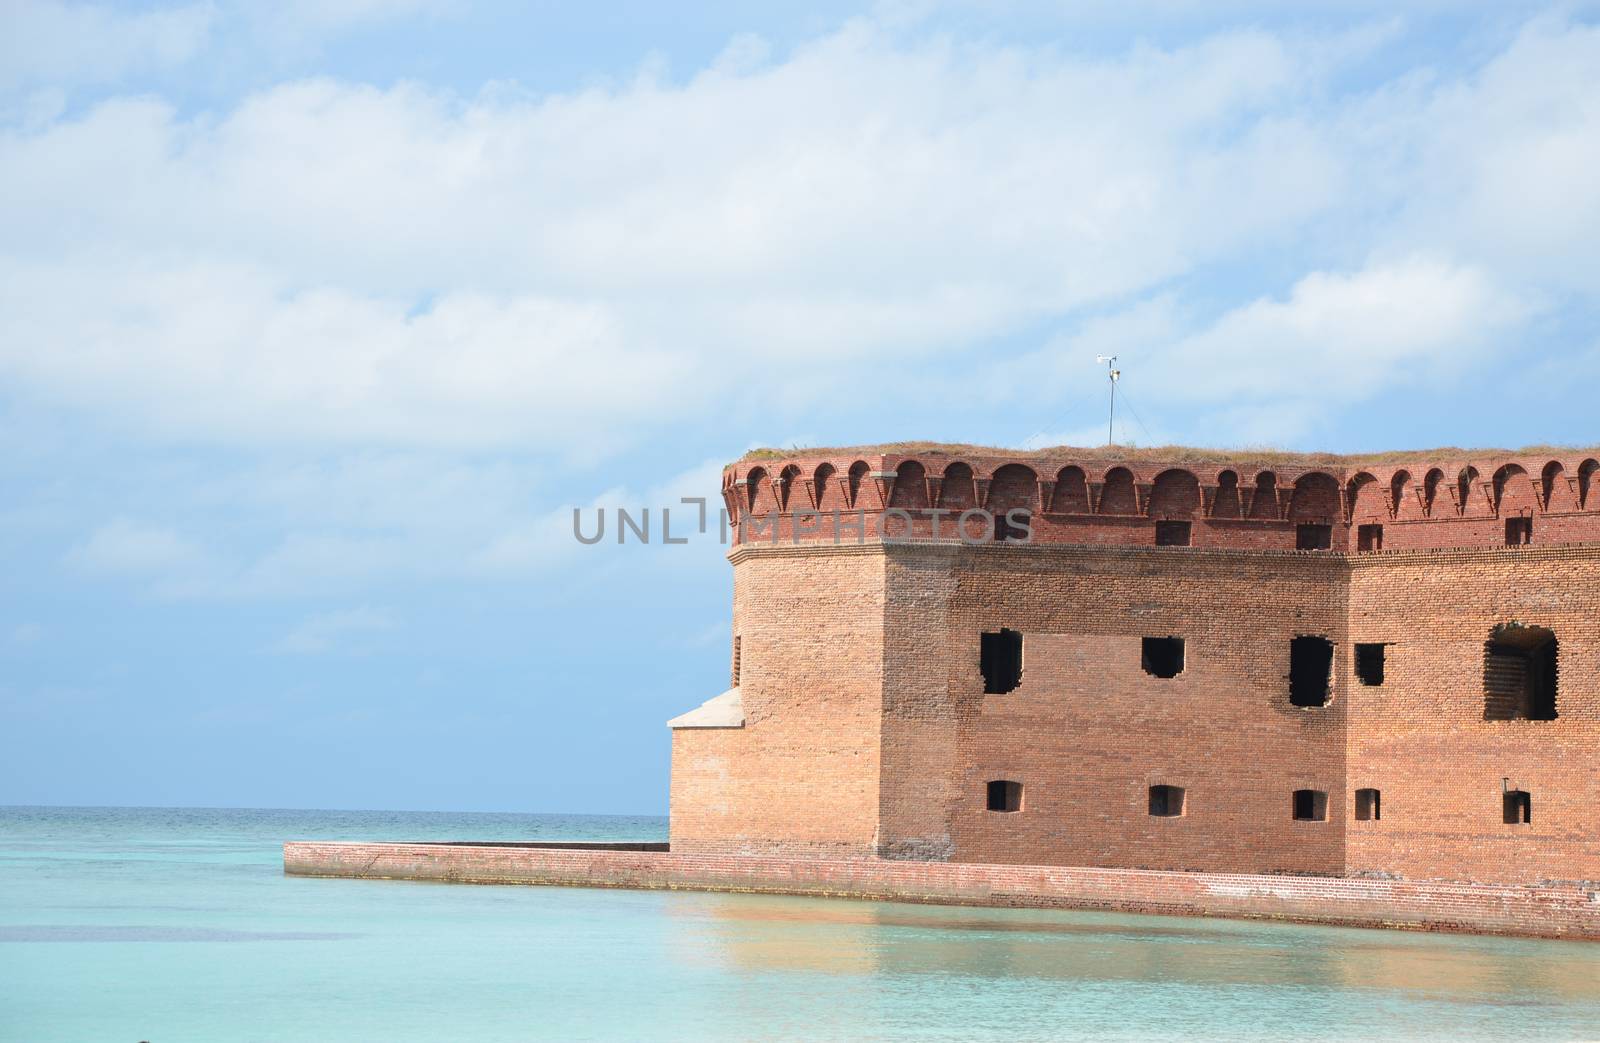 An old fort located on the island of Dry. Tortugas. This is off the coast of Florida.It served as fort and prison during the Civil War.